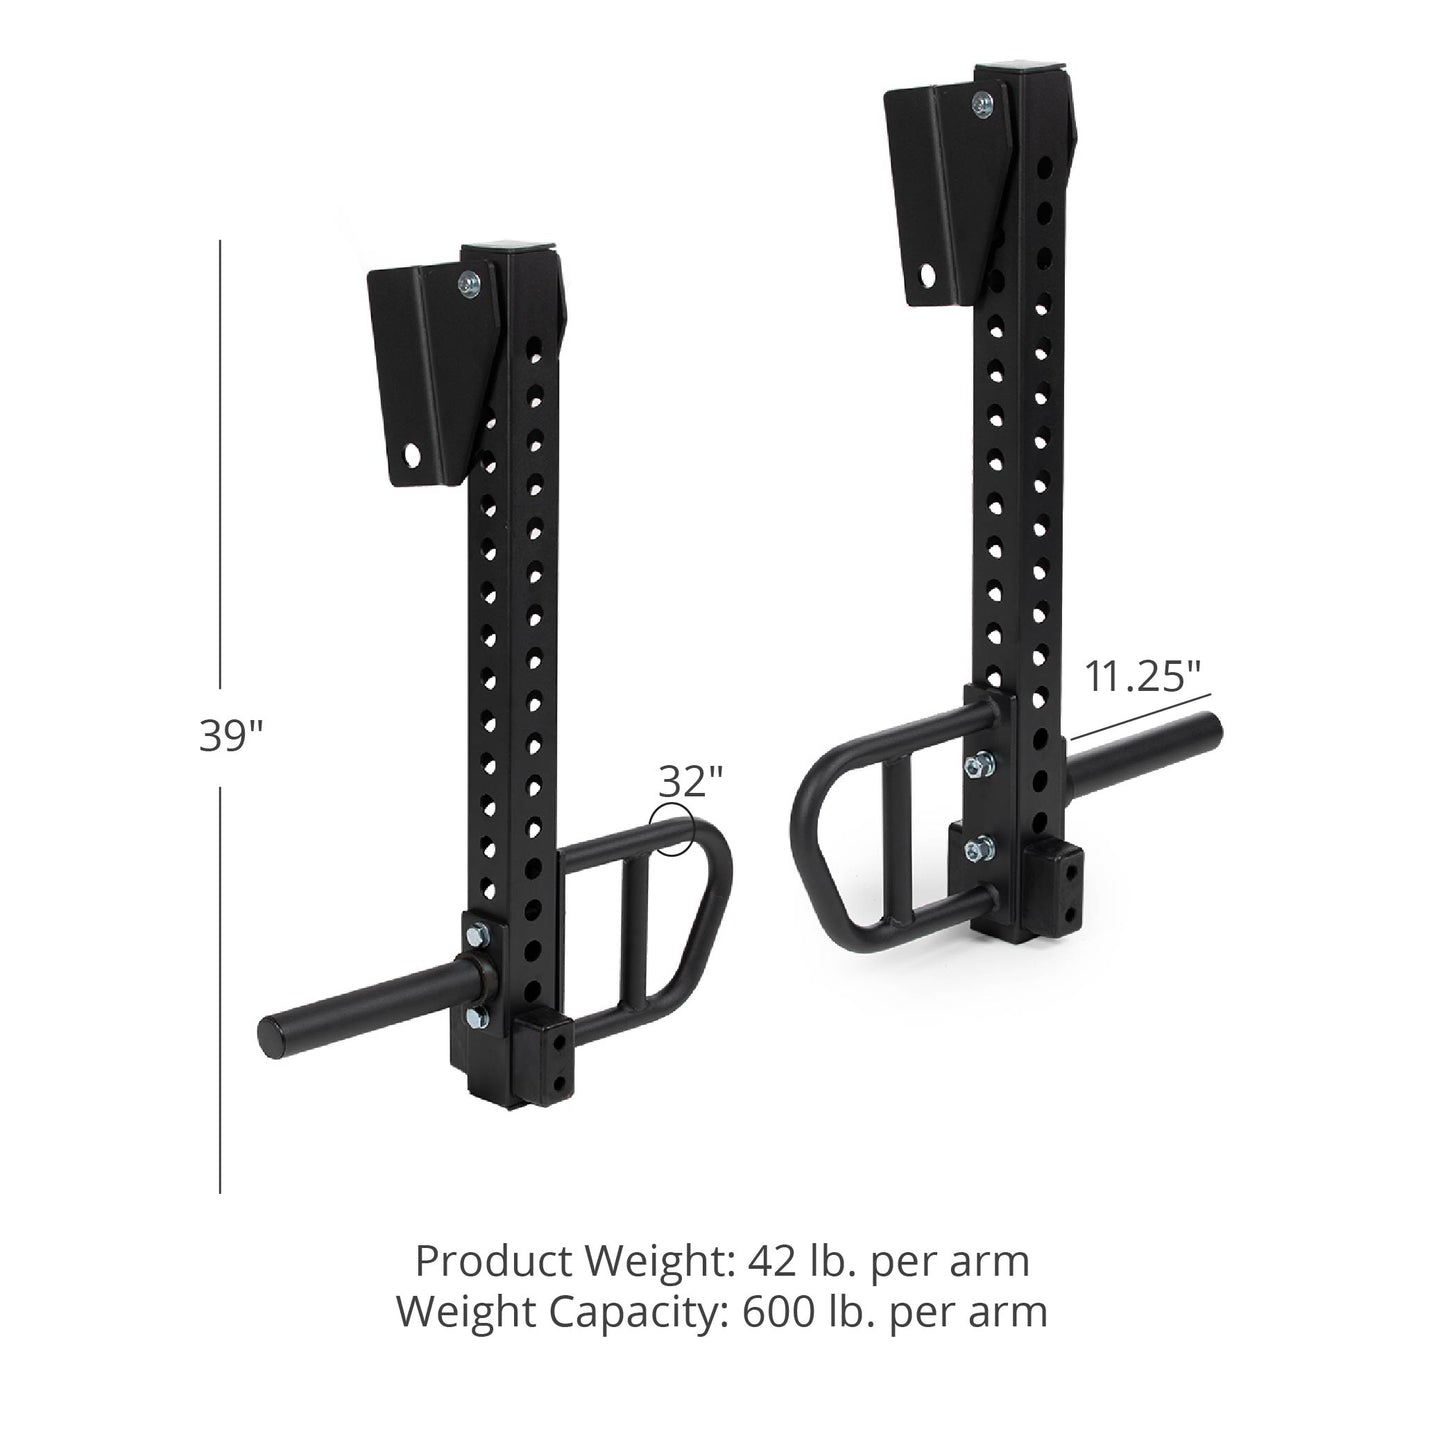 TITAN Series Adjustable Lever Arms - view 9